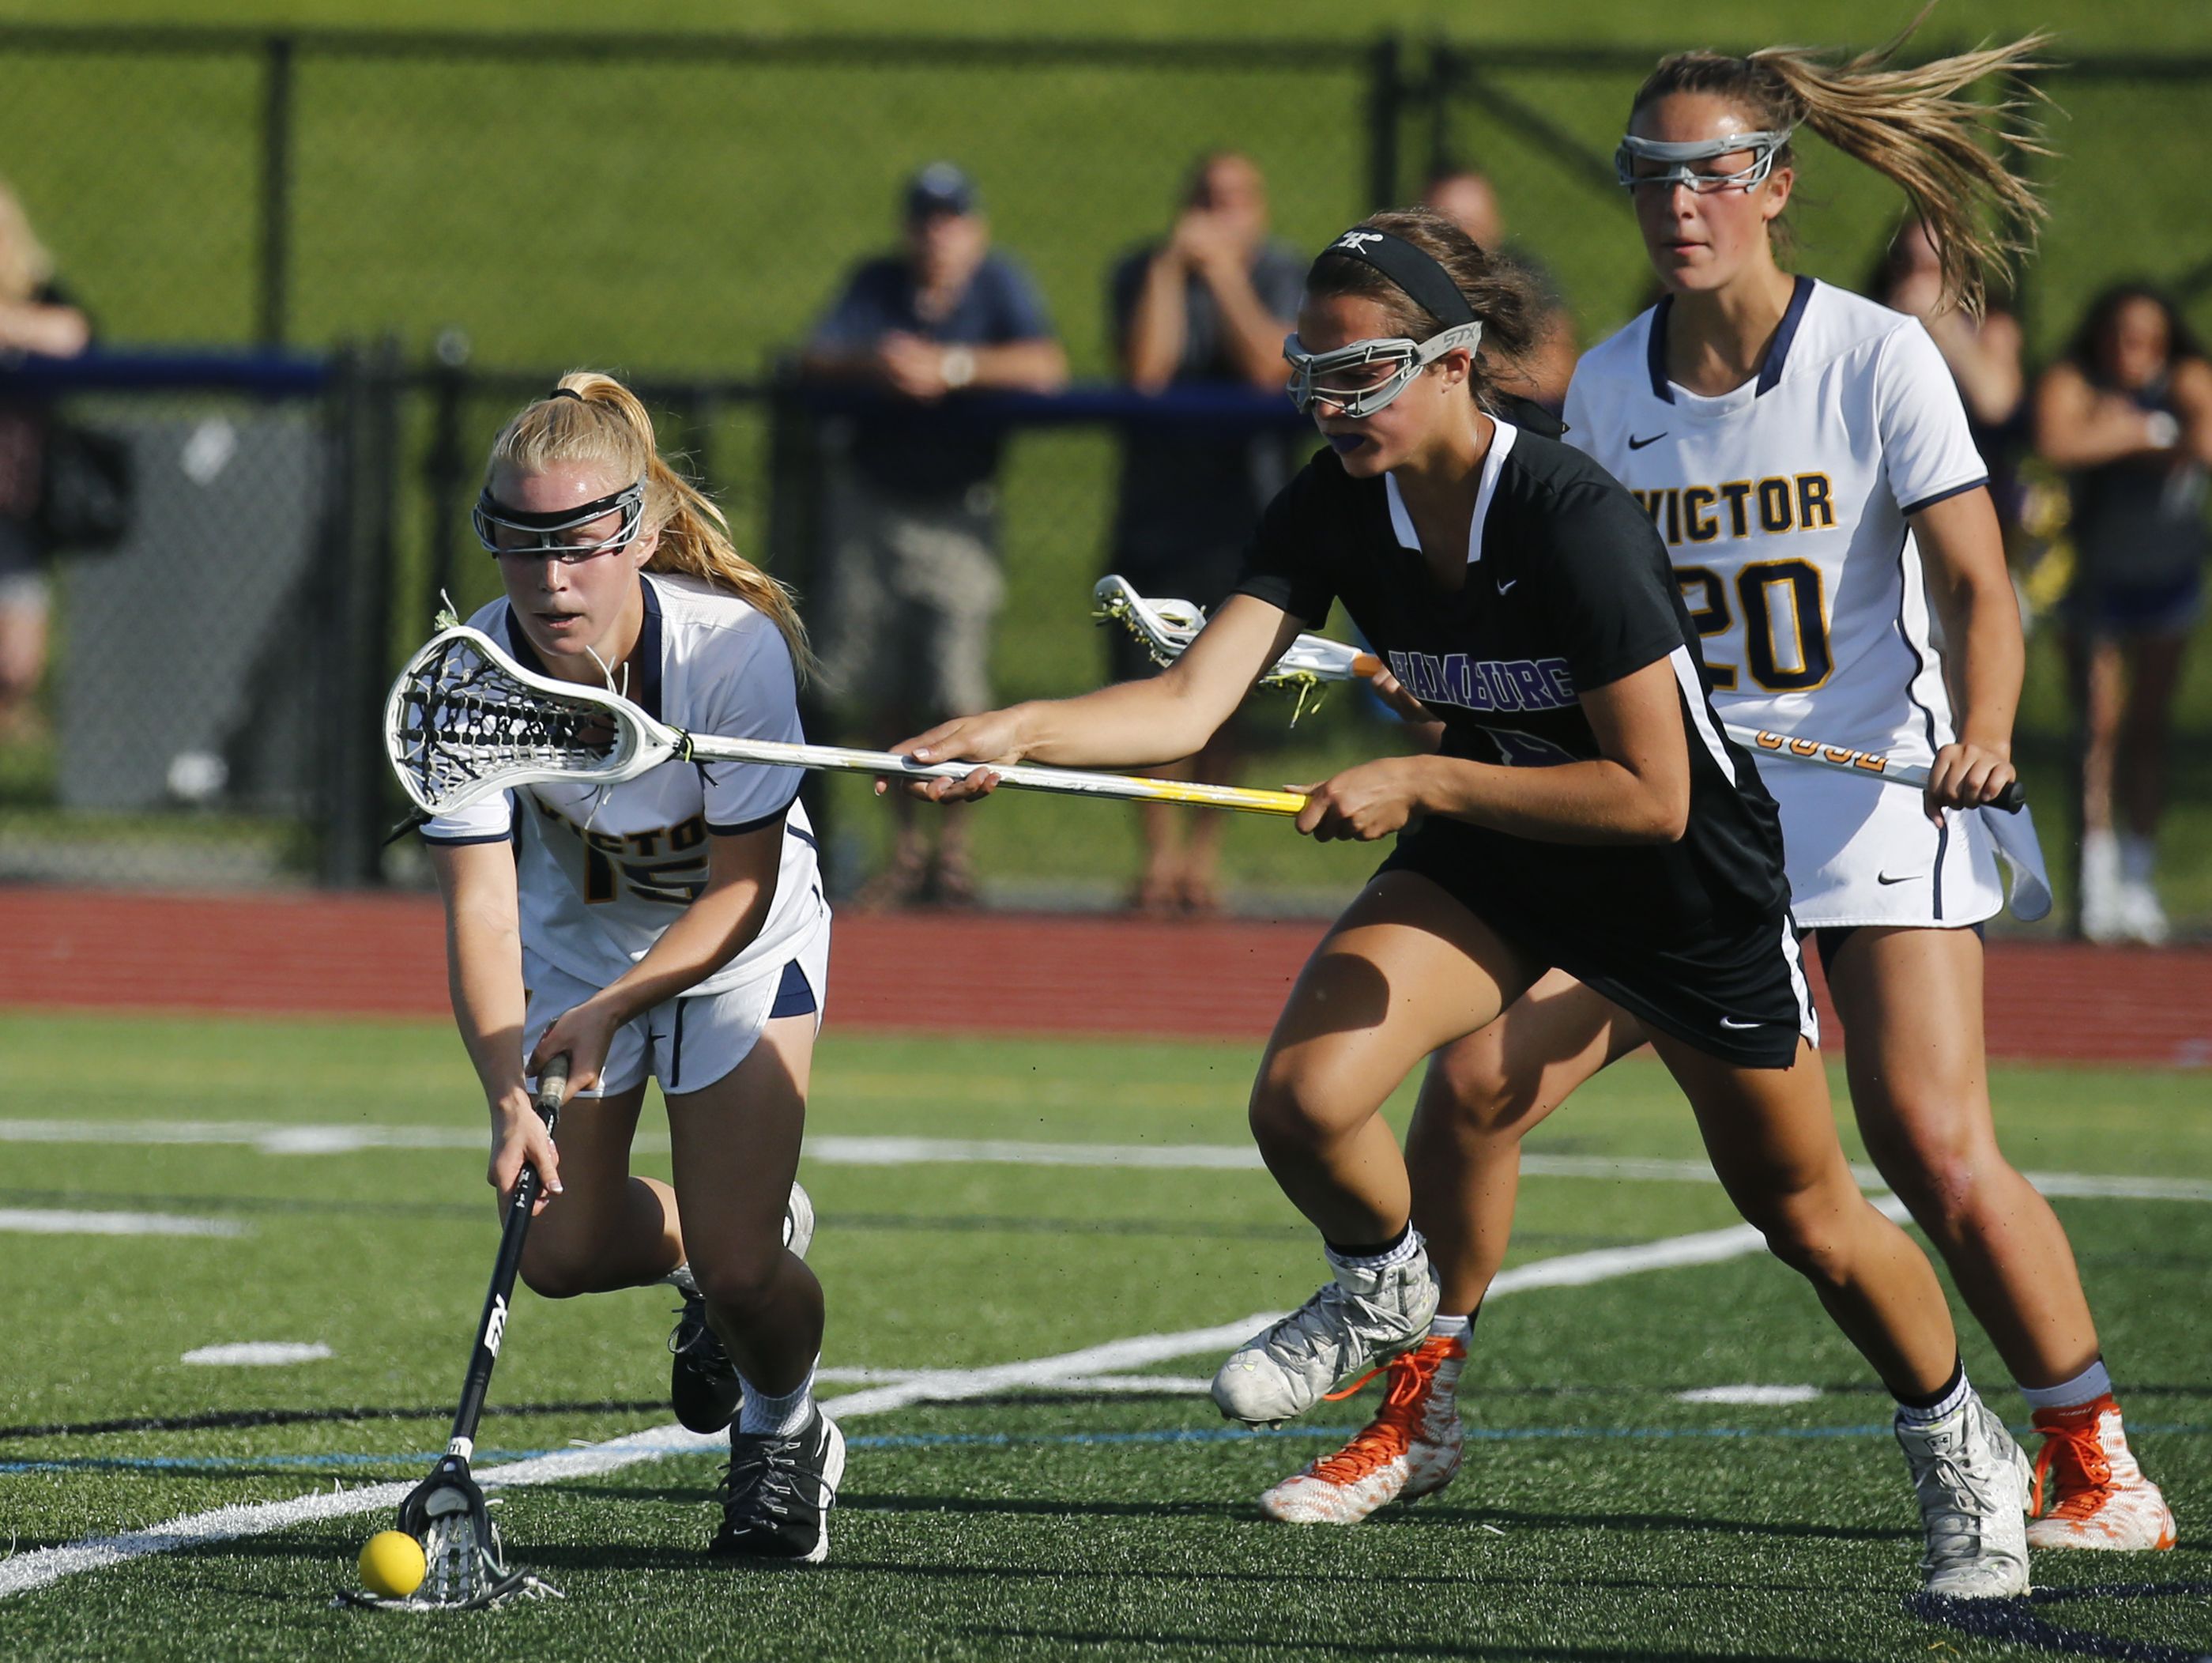 Victor's Kaci Messier picks up the ball under the stick of Hamburg's Bella Lettieri in the first half at Pittsford Sutherland High School.